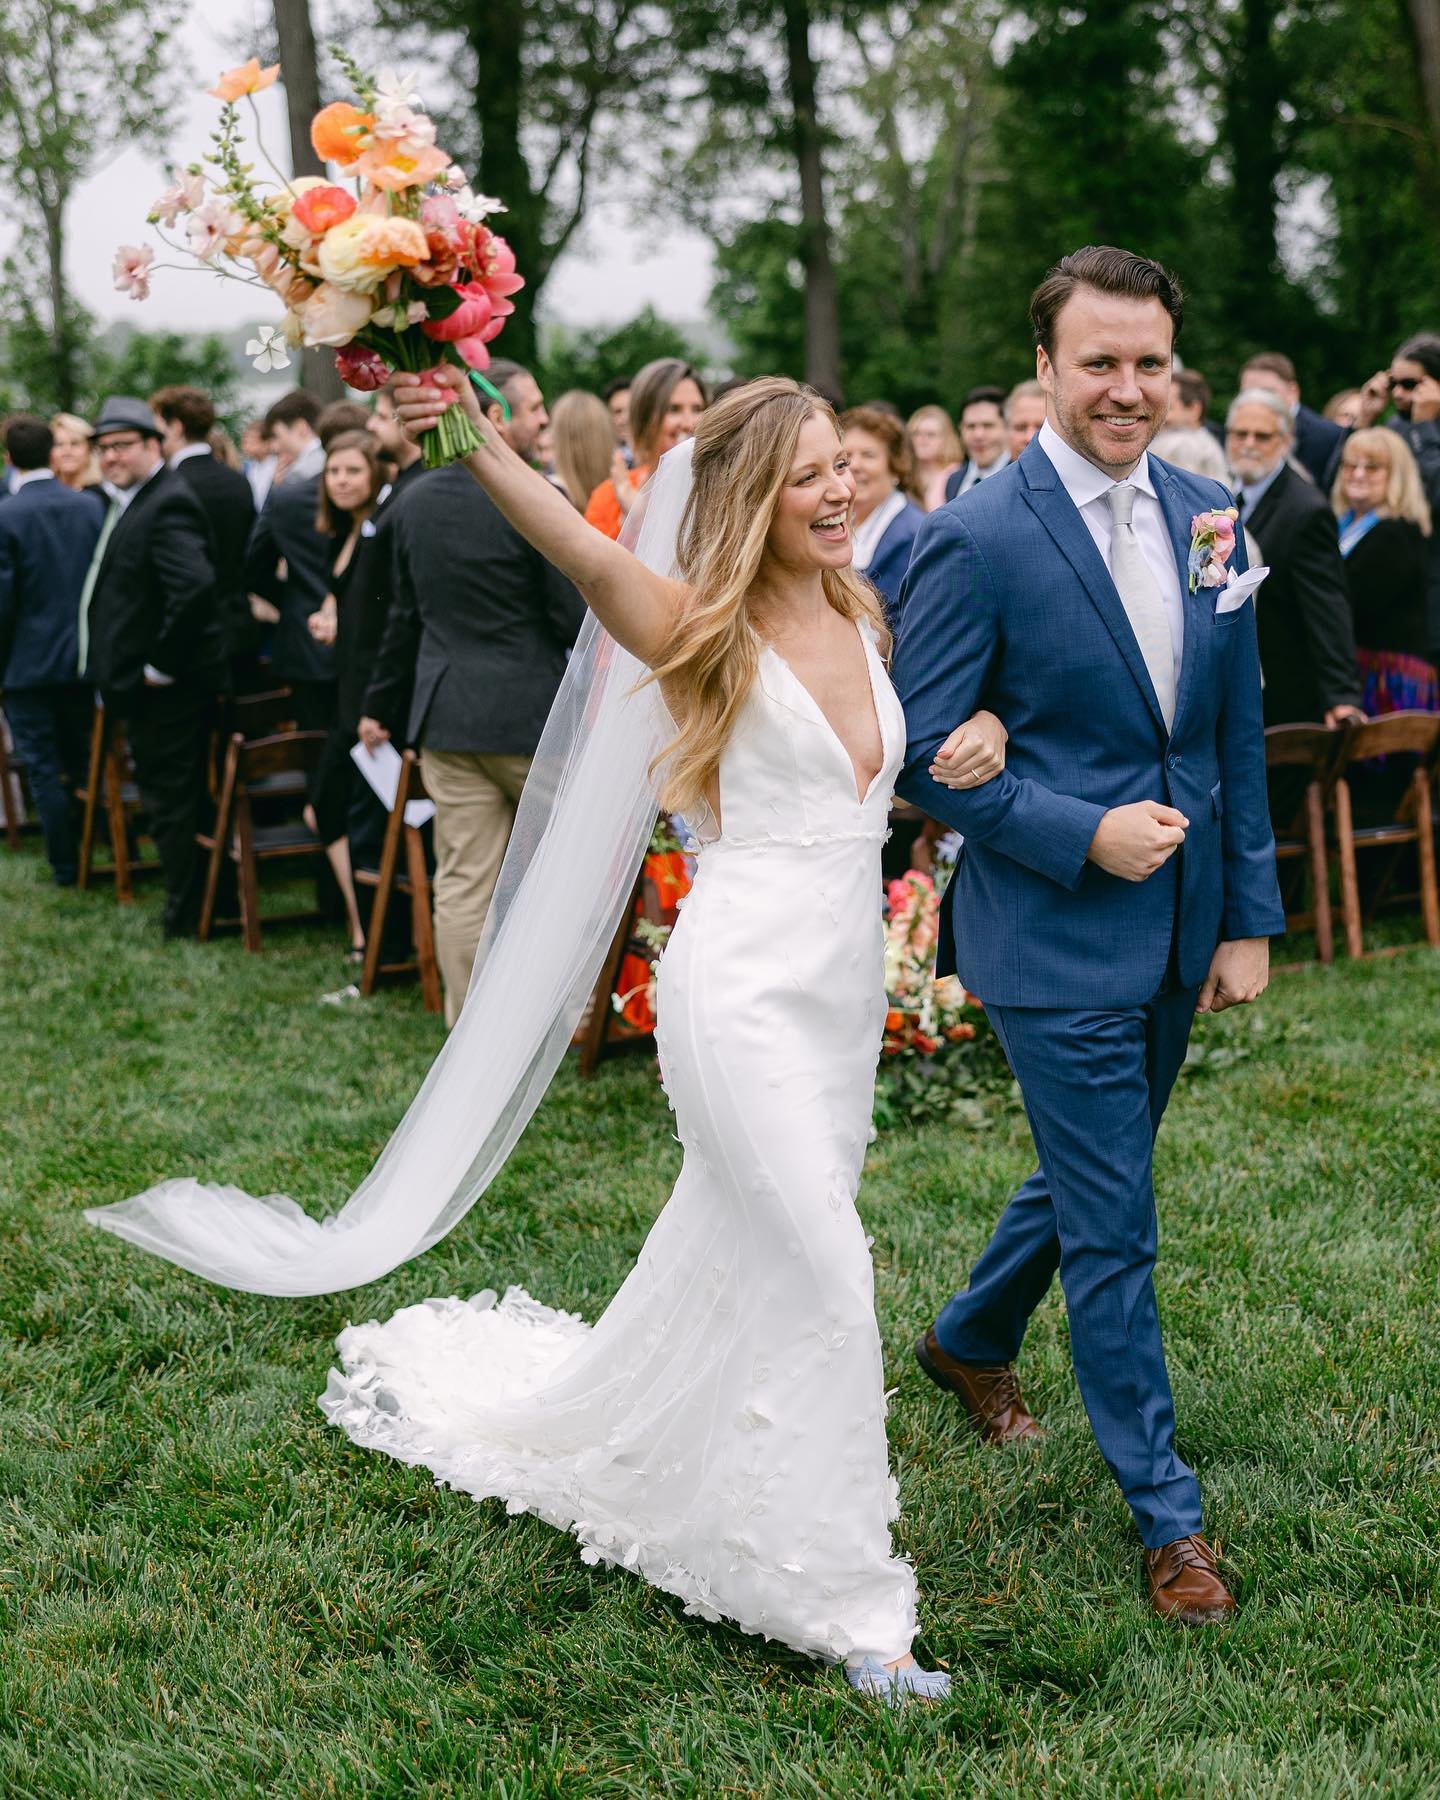 Jessica and Stuart&mdash; the definition of sunshine on a cloudy day. ☁️🌸💫

Planning: @ellelorenandco 
Florals: @monarchflower.farm 
Beauty: @emily.artistry 
Venue: @uppershirleyweddings 
Photography: @sarahmattozziphoto 
Second photographer: @dosh